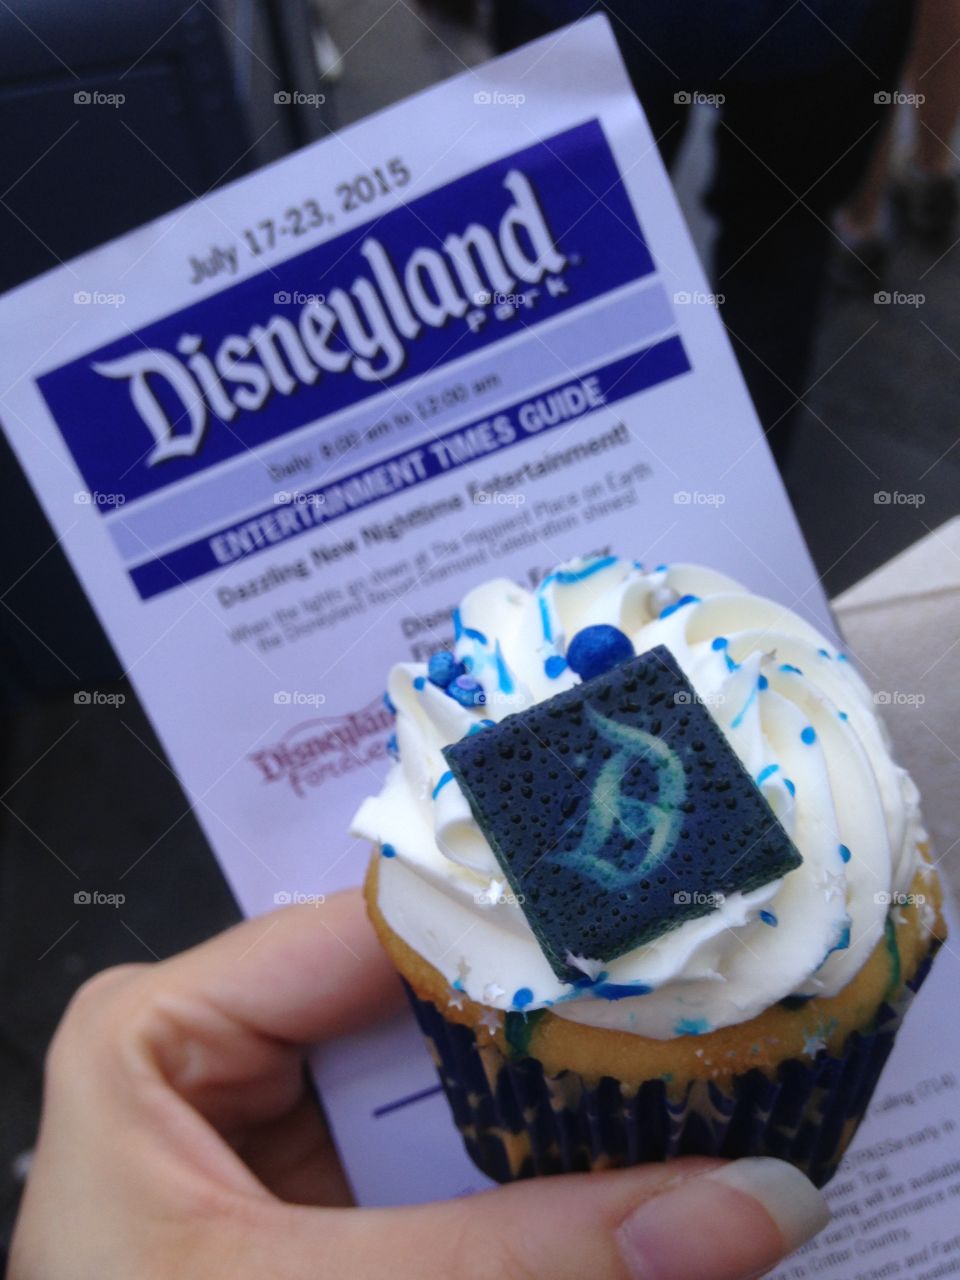 Disneyland 60th cupcake. Cupcake from July 17, 2015 that was given out for free at the park for The Disneyland Resort 60th birthday celebration